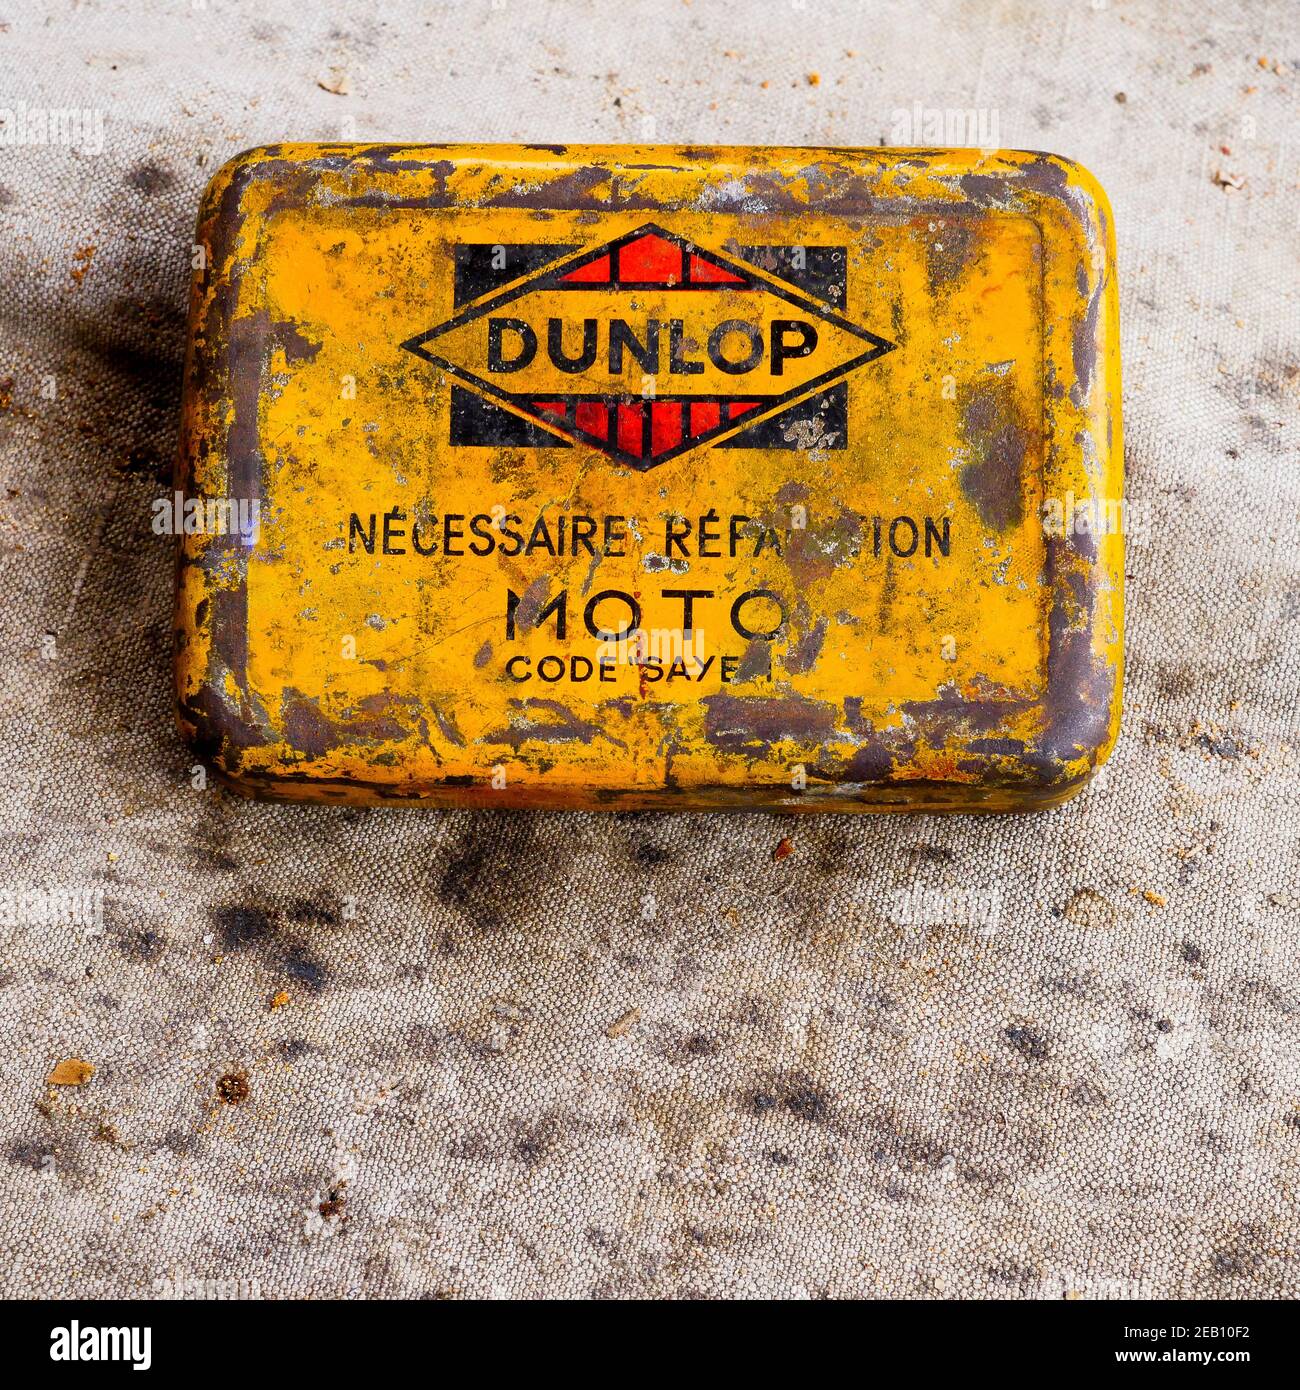 Vintage Dunlop repair kit for motorcycles, France Stock Photo - Alamy